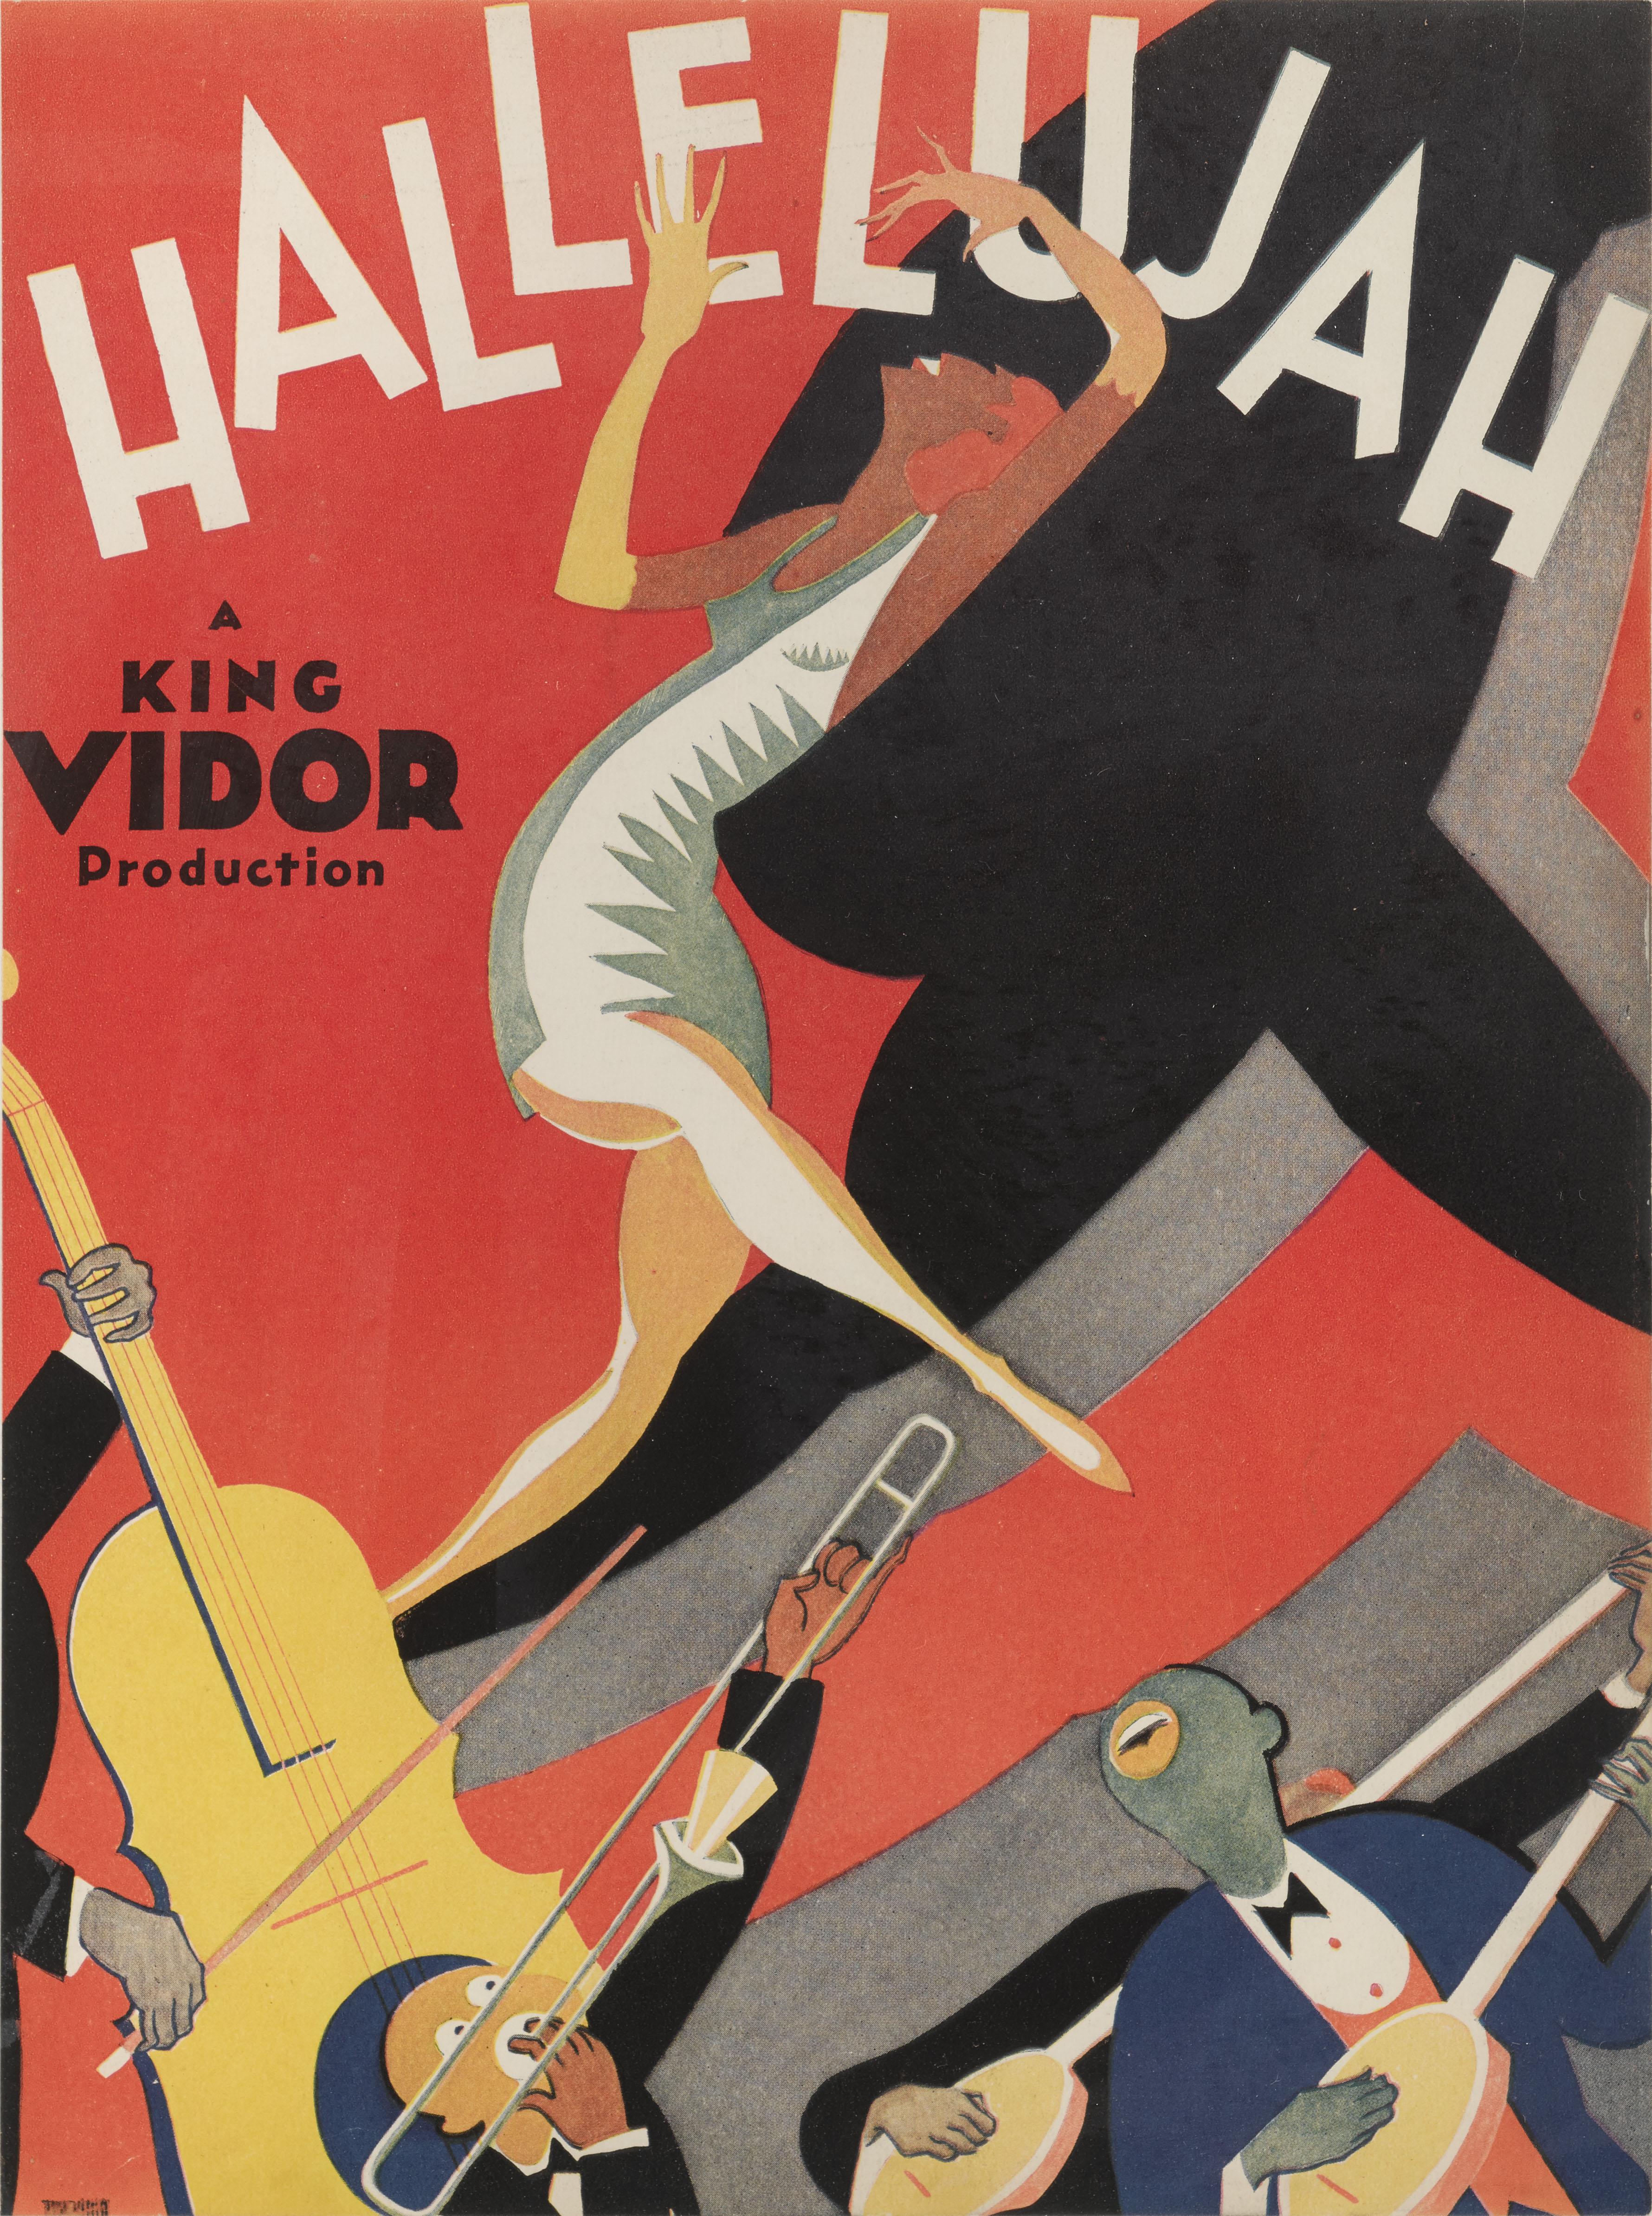 Original US Trade advertisement for the 1929 pre-Code Musical Hallelujah directed by King Vidor and starring Daniel L. Haynes, Nina Mae McKinney and William Fountaine.
The wonderful artwork on this piece is by the American caricaturists and